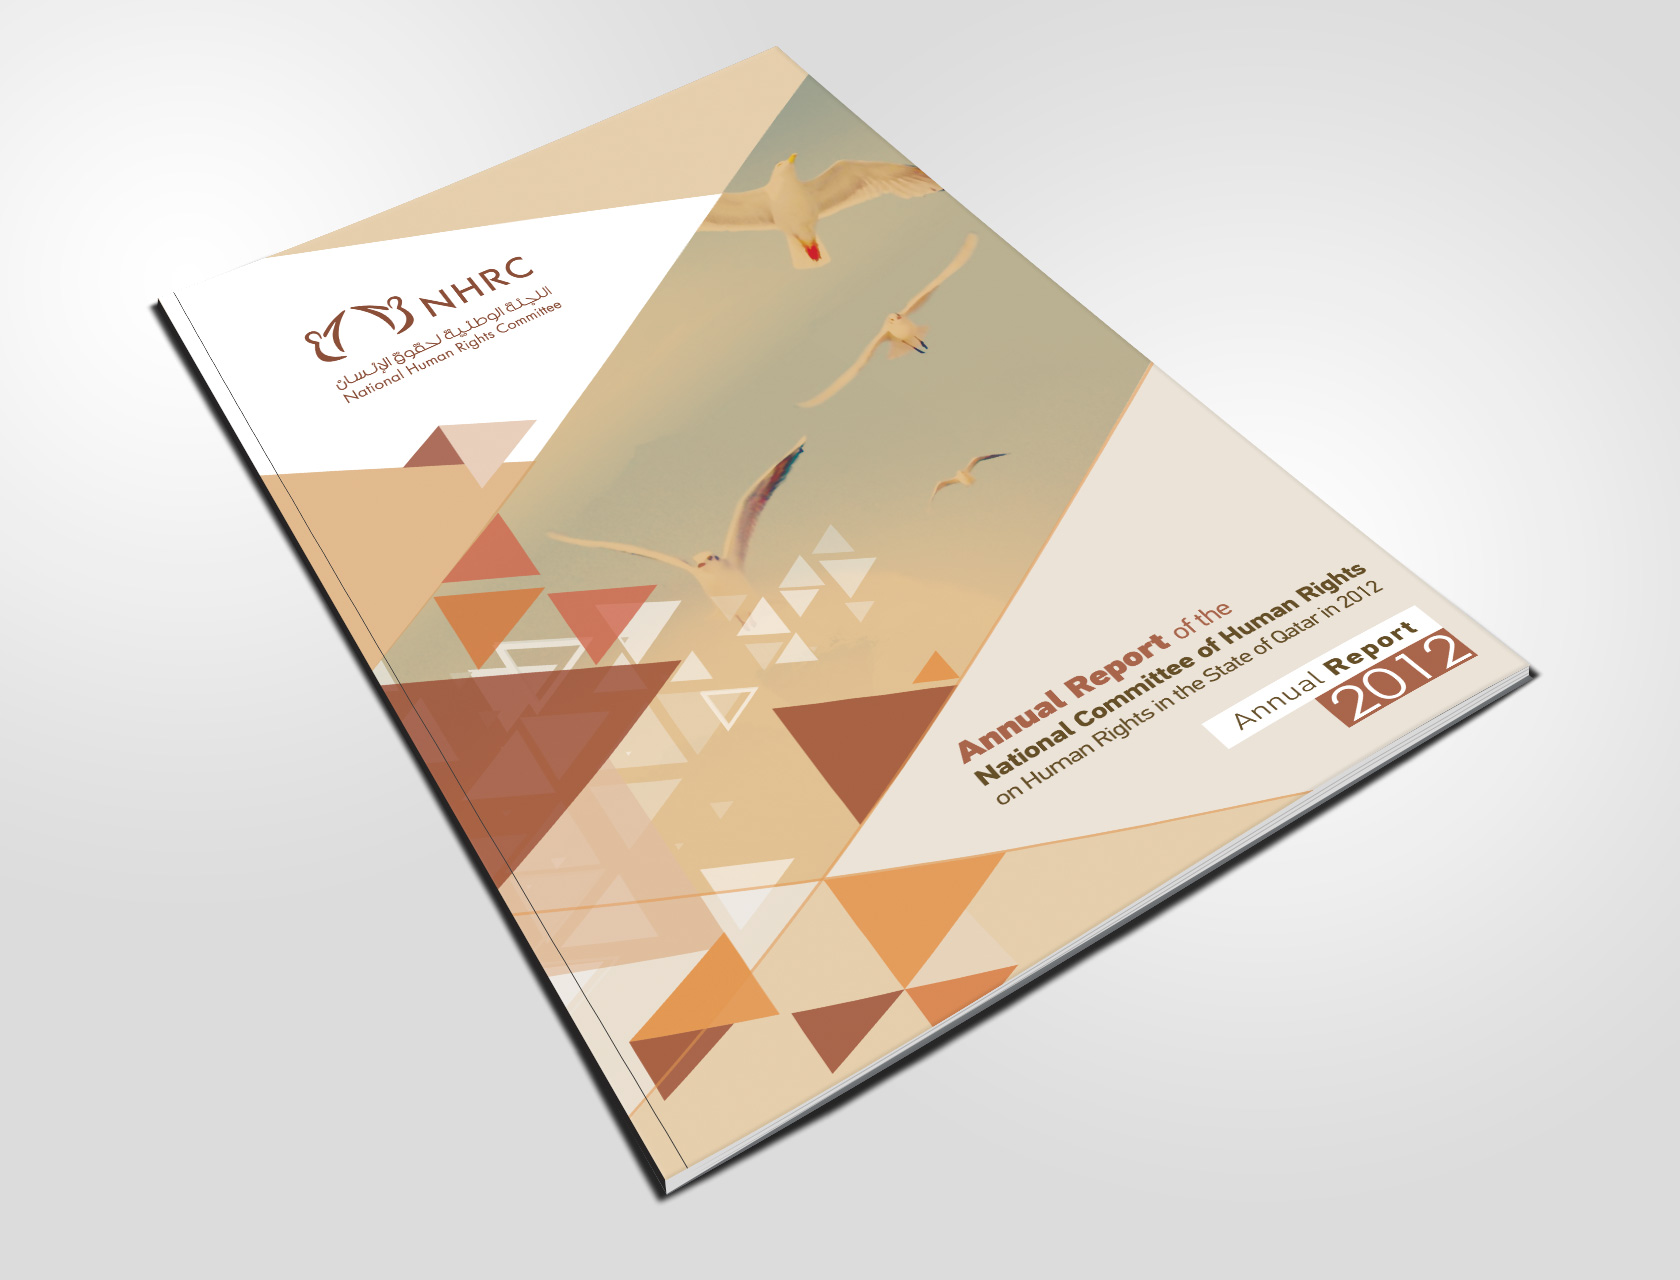 Download Nhcr Annual Report A4 2012 Mockup 02 By Altair Assisno On Deviantart